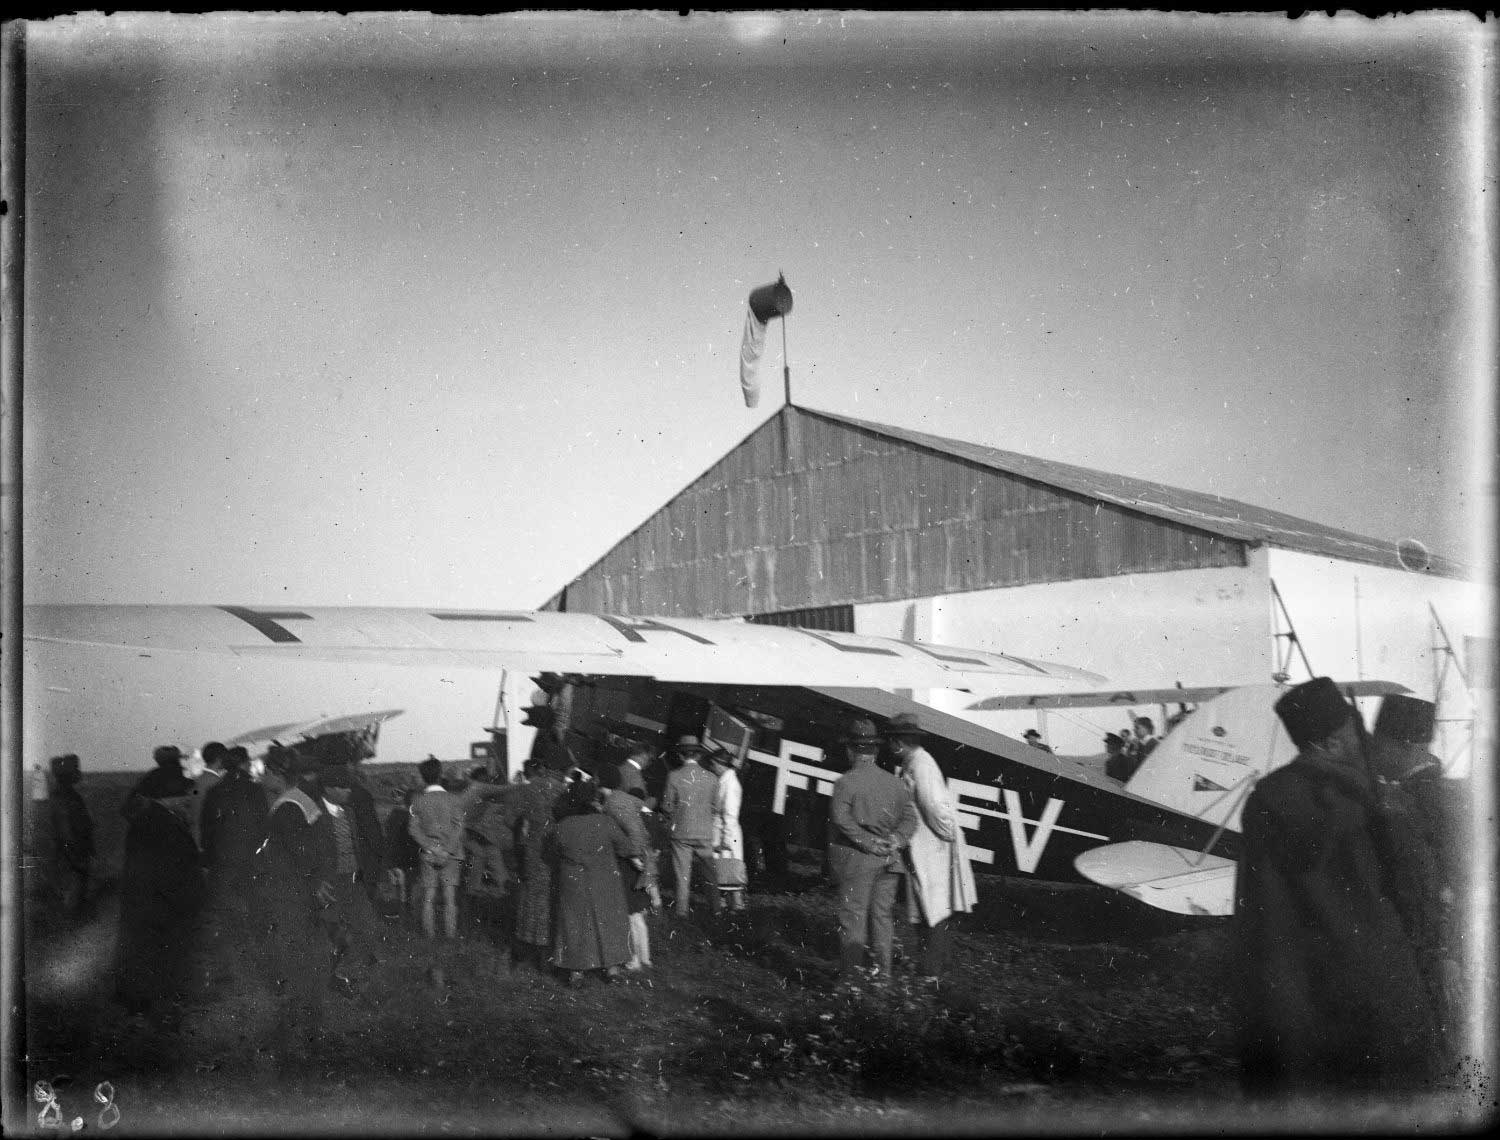 Aeroport Ibn Battouta de Tanger - A group of people in European and local clothing looking at an airplane near its hanger